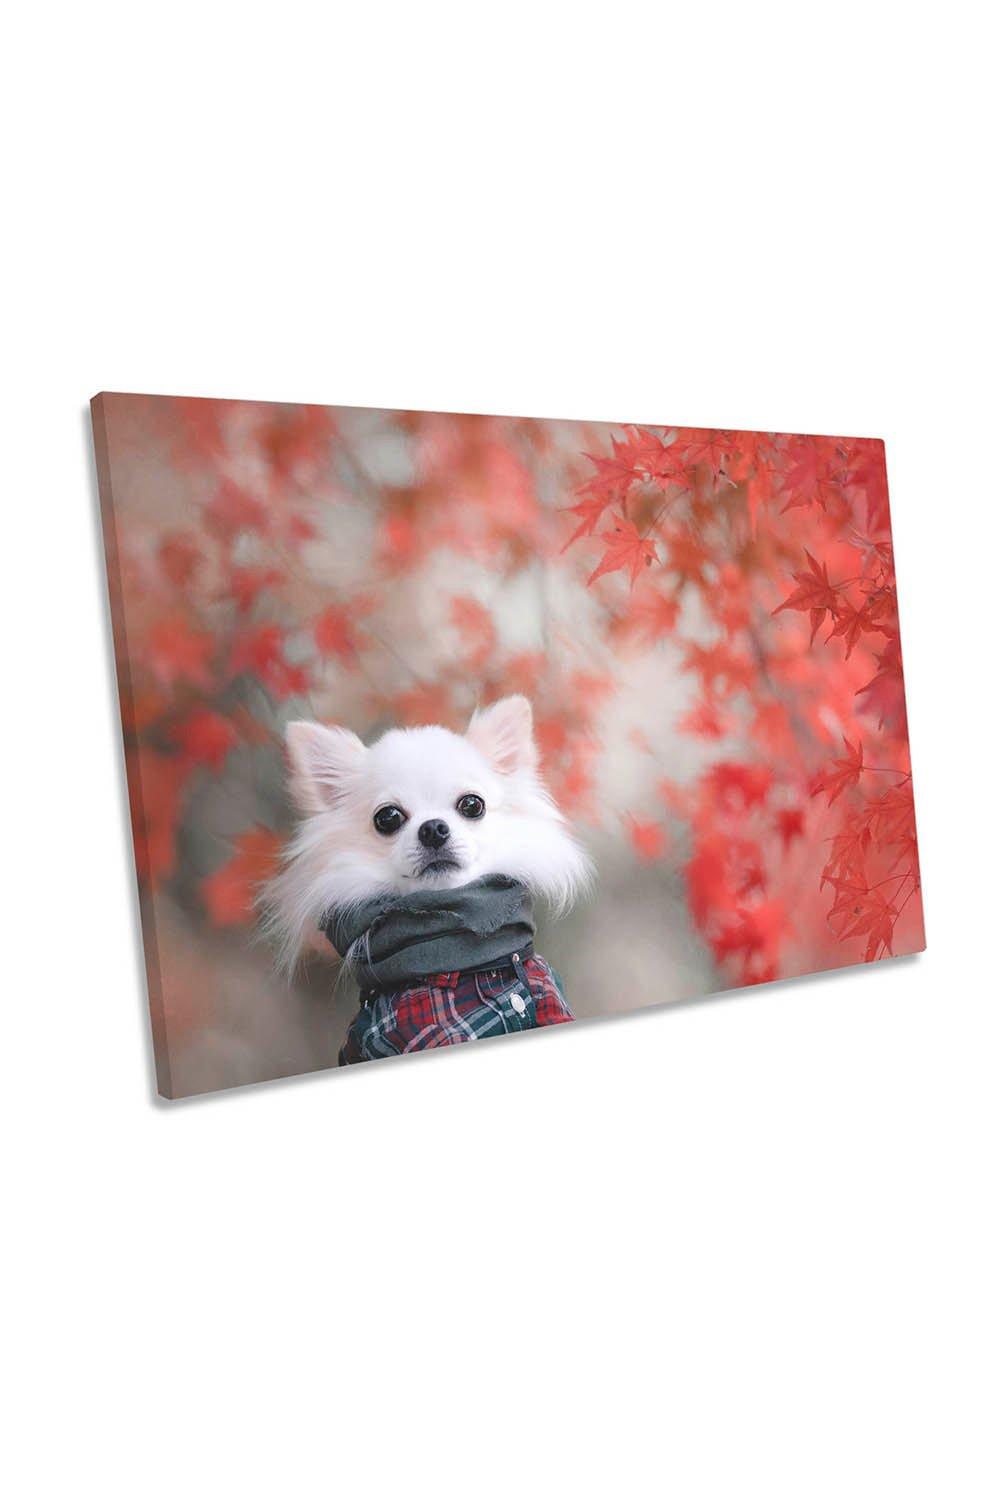 Chihuahua Dog Red Blossom Canvas Wall Art Picture Print